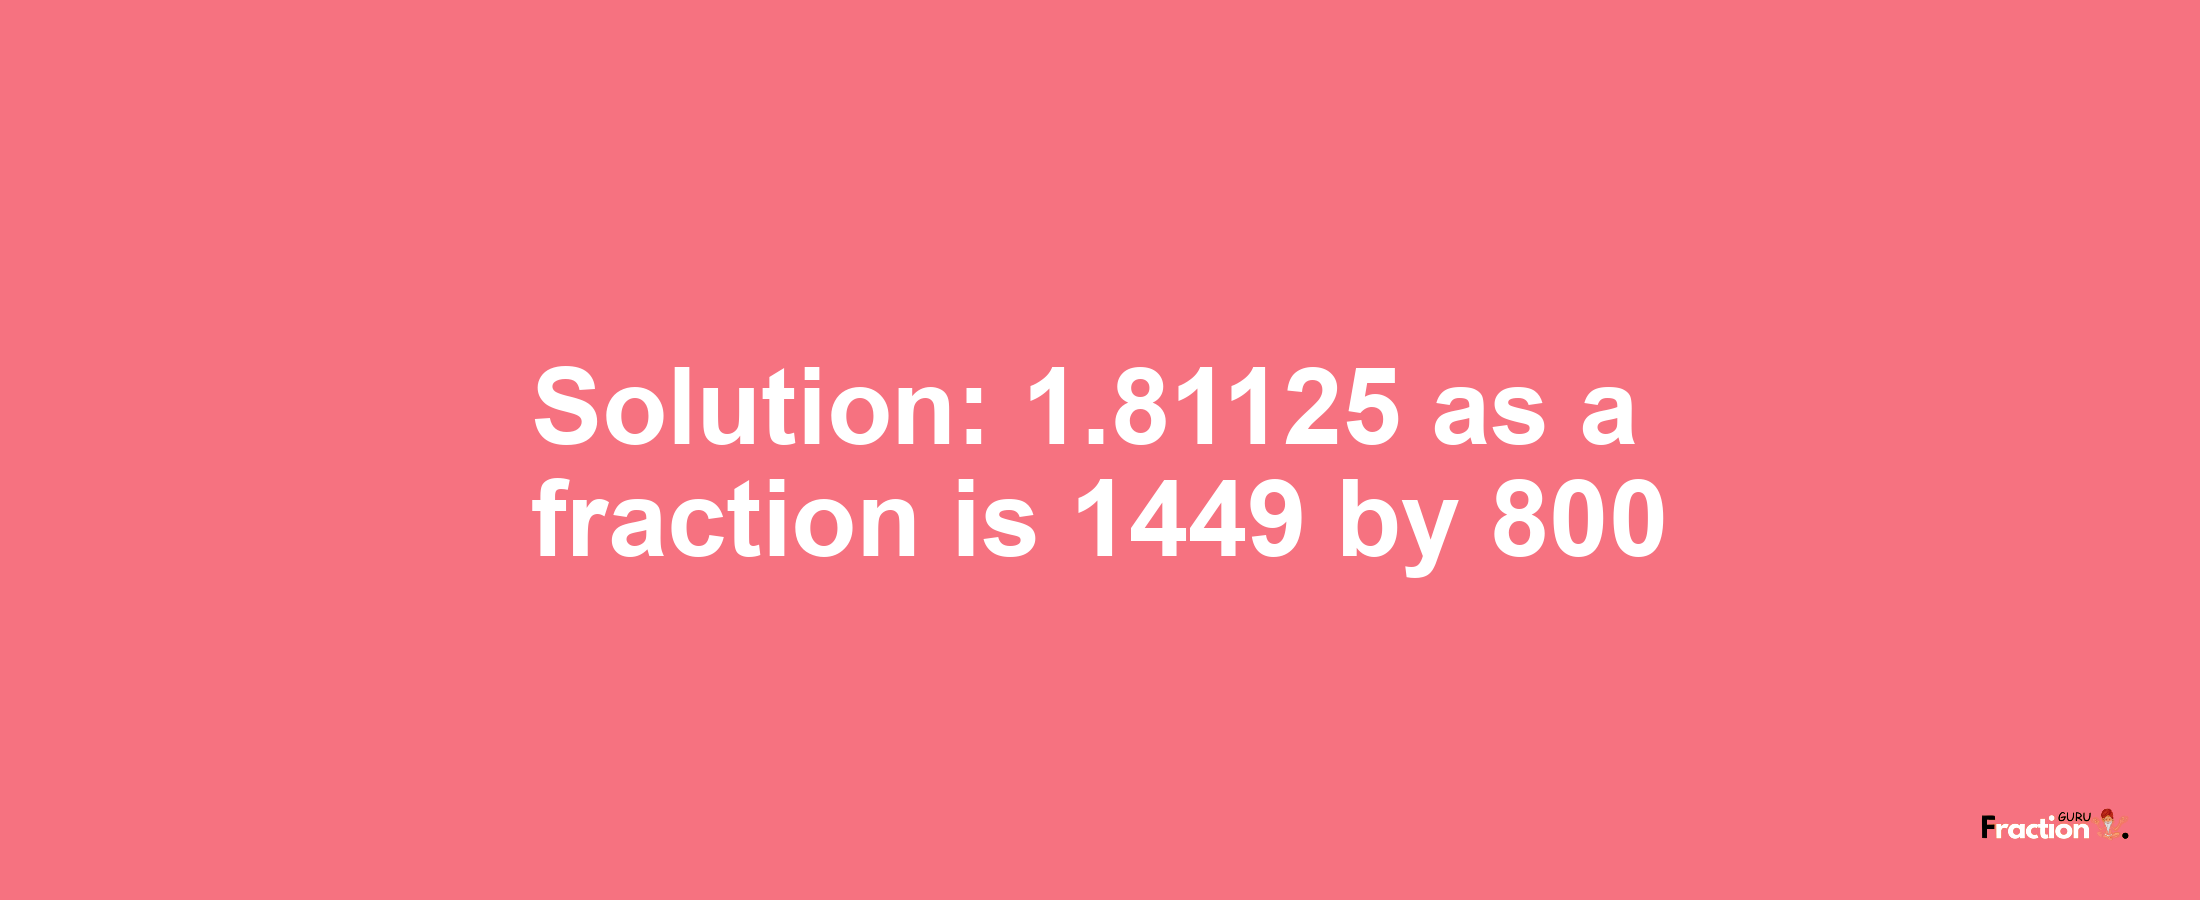 Solution:1.81125 as a fraction is 1449/800